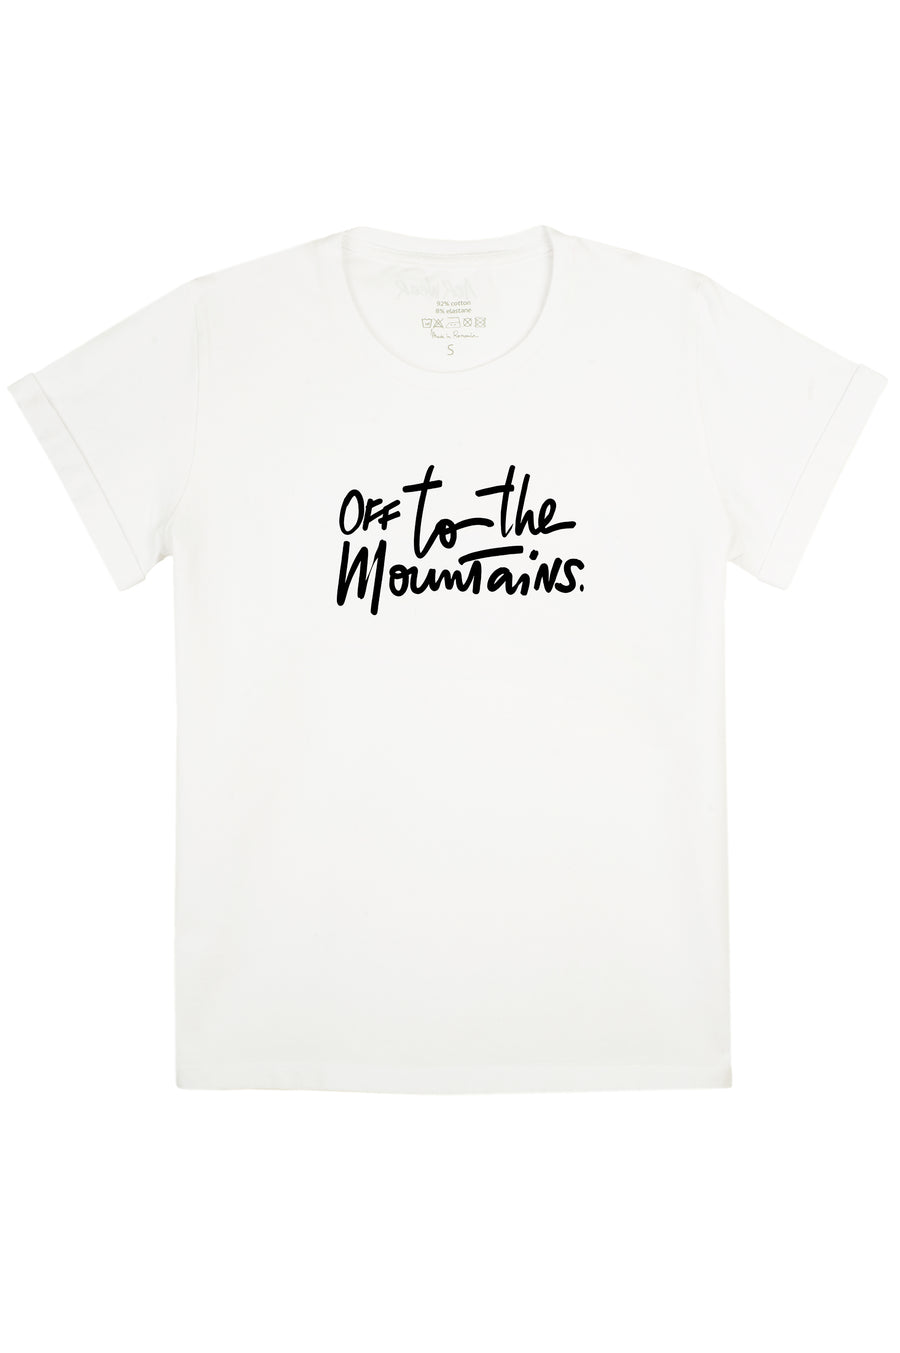 Off to the mountains T-shirt